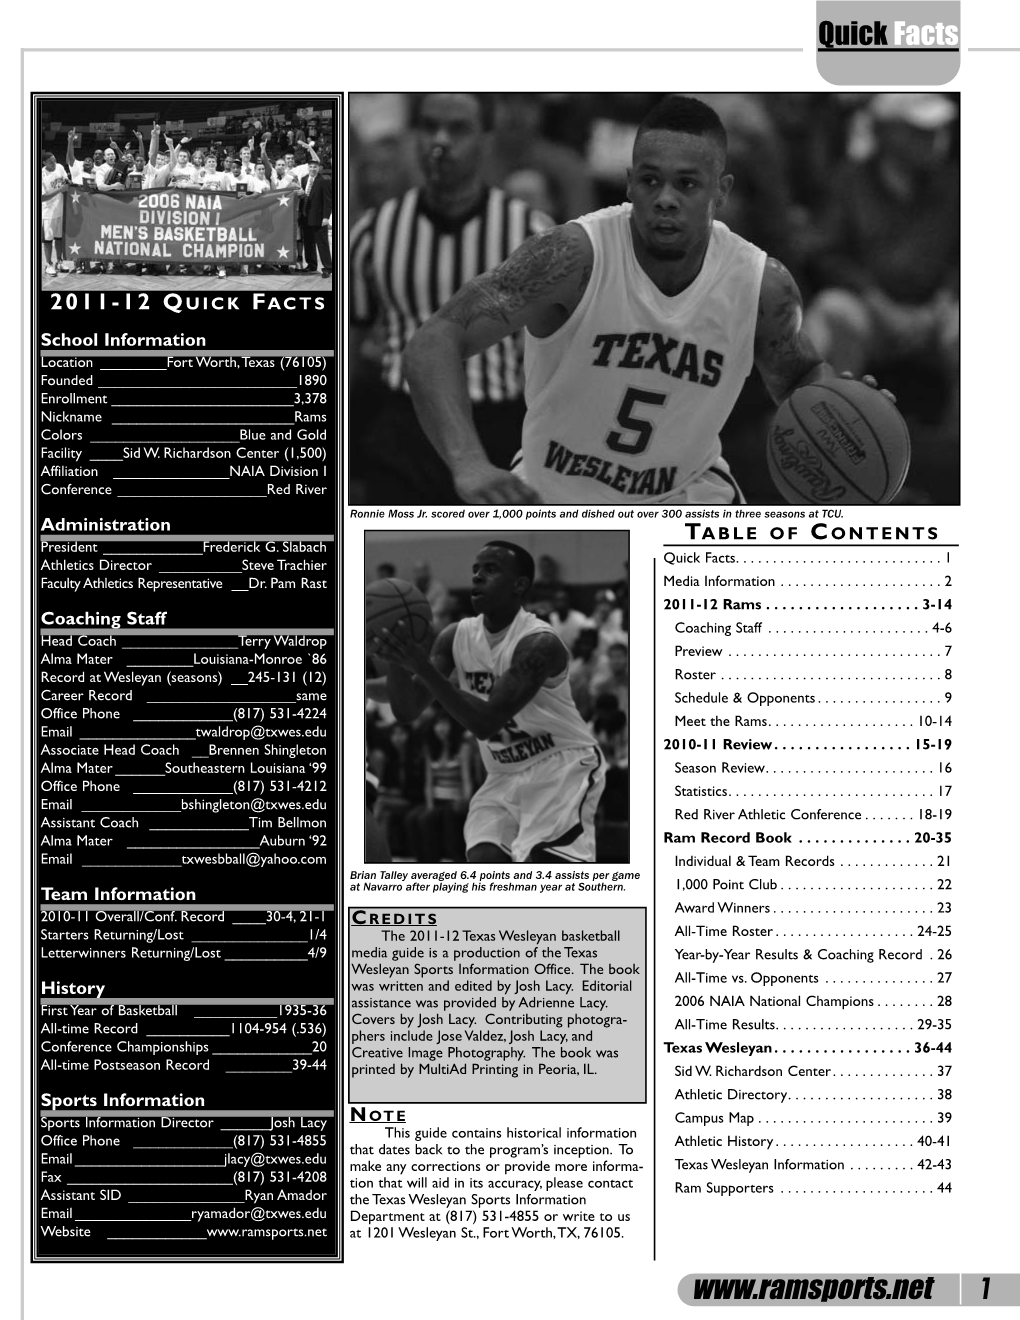 Texas Wesleyan Basketball All-Time Roster